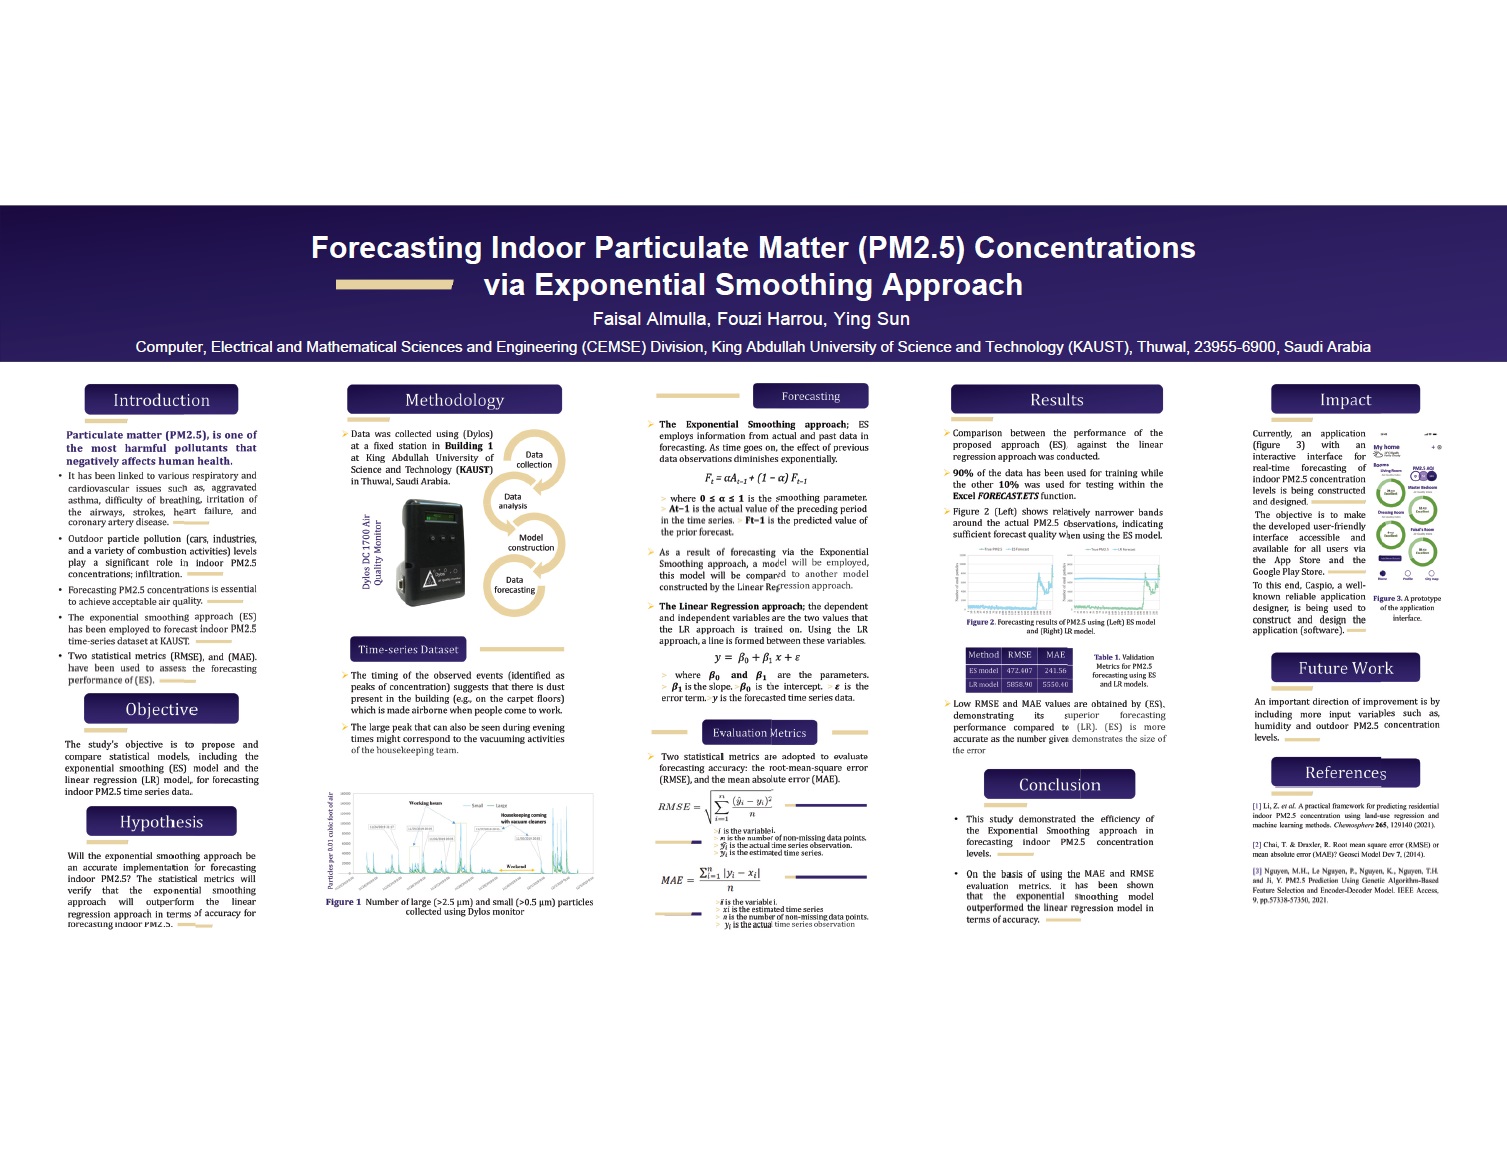 Faisal Almulla_Forecasting Indoor Particulate Matter (PM2.5) Concentrations via Exponential Smoothing Approach